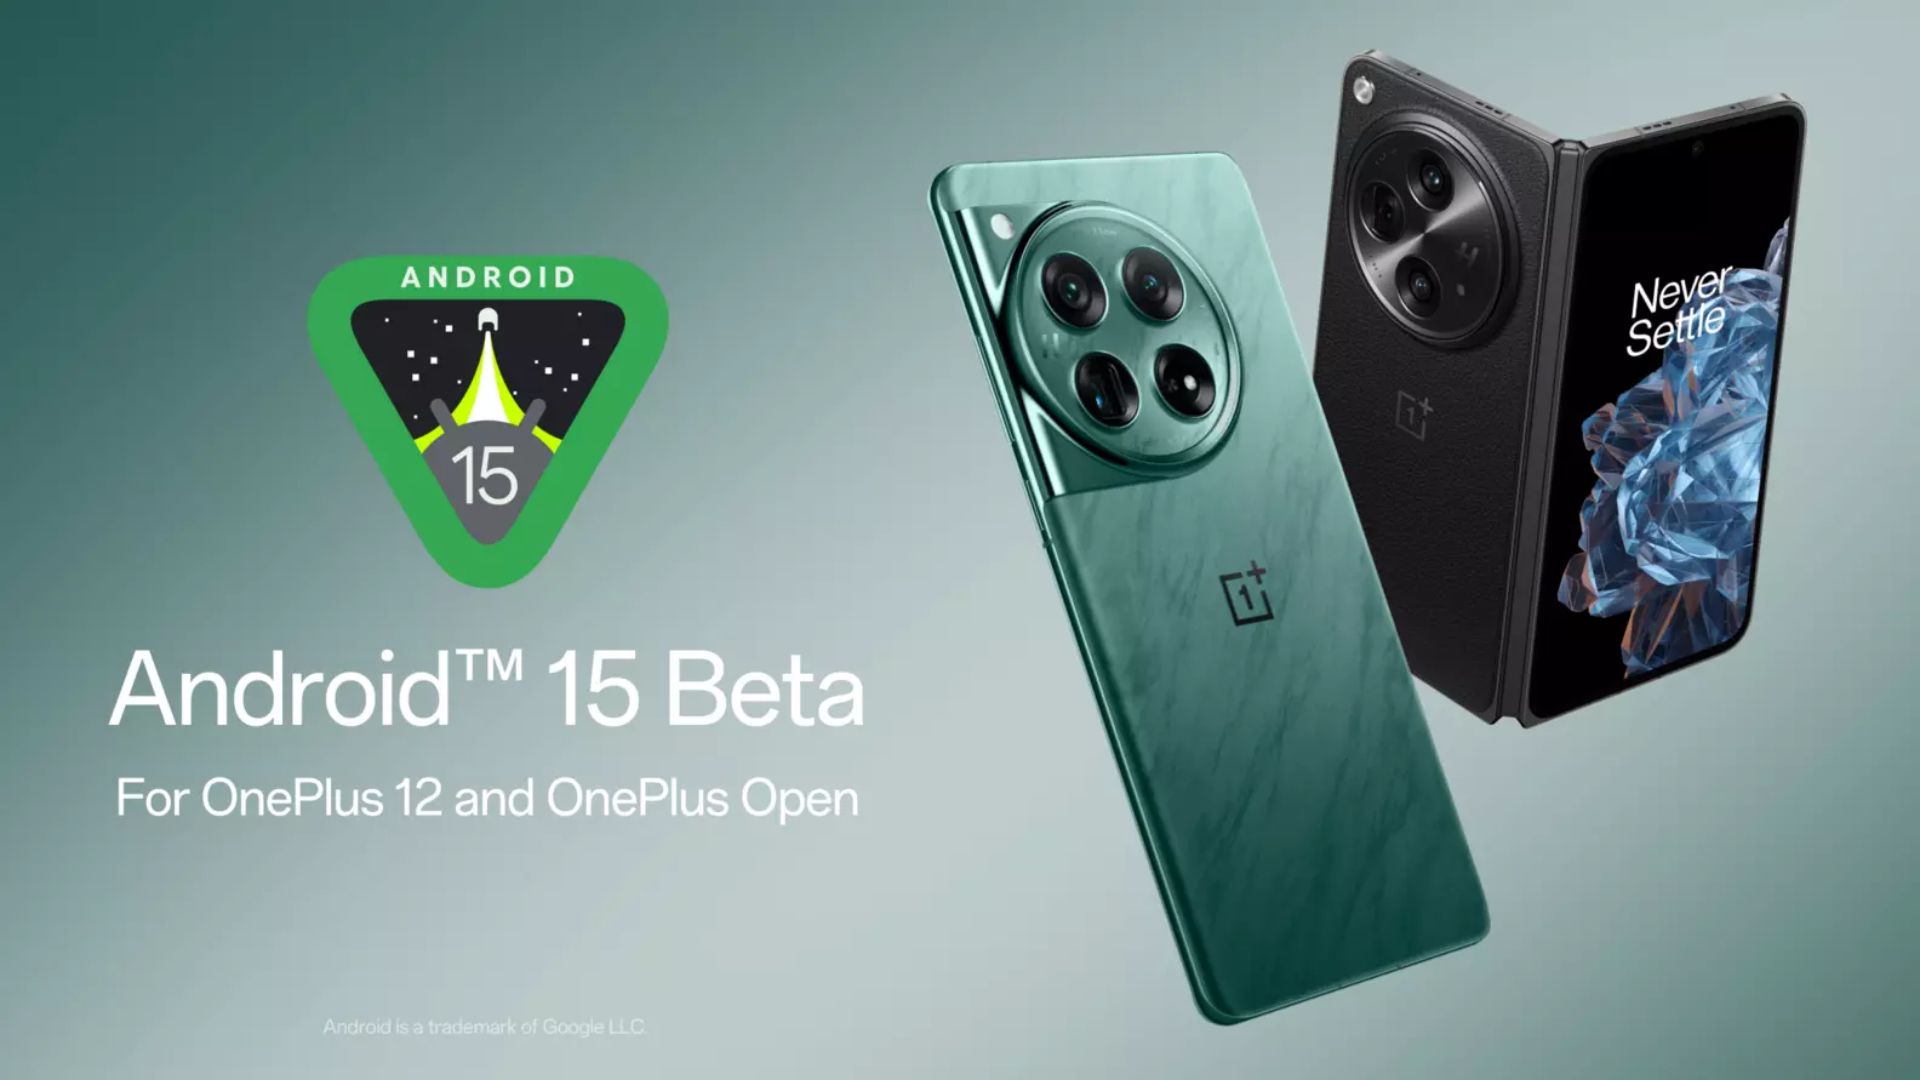 Image showing OnePlus 12 and OnePlus Open by the Android 15 logo. 